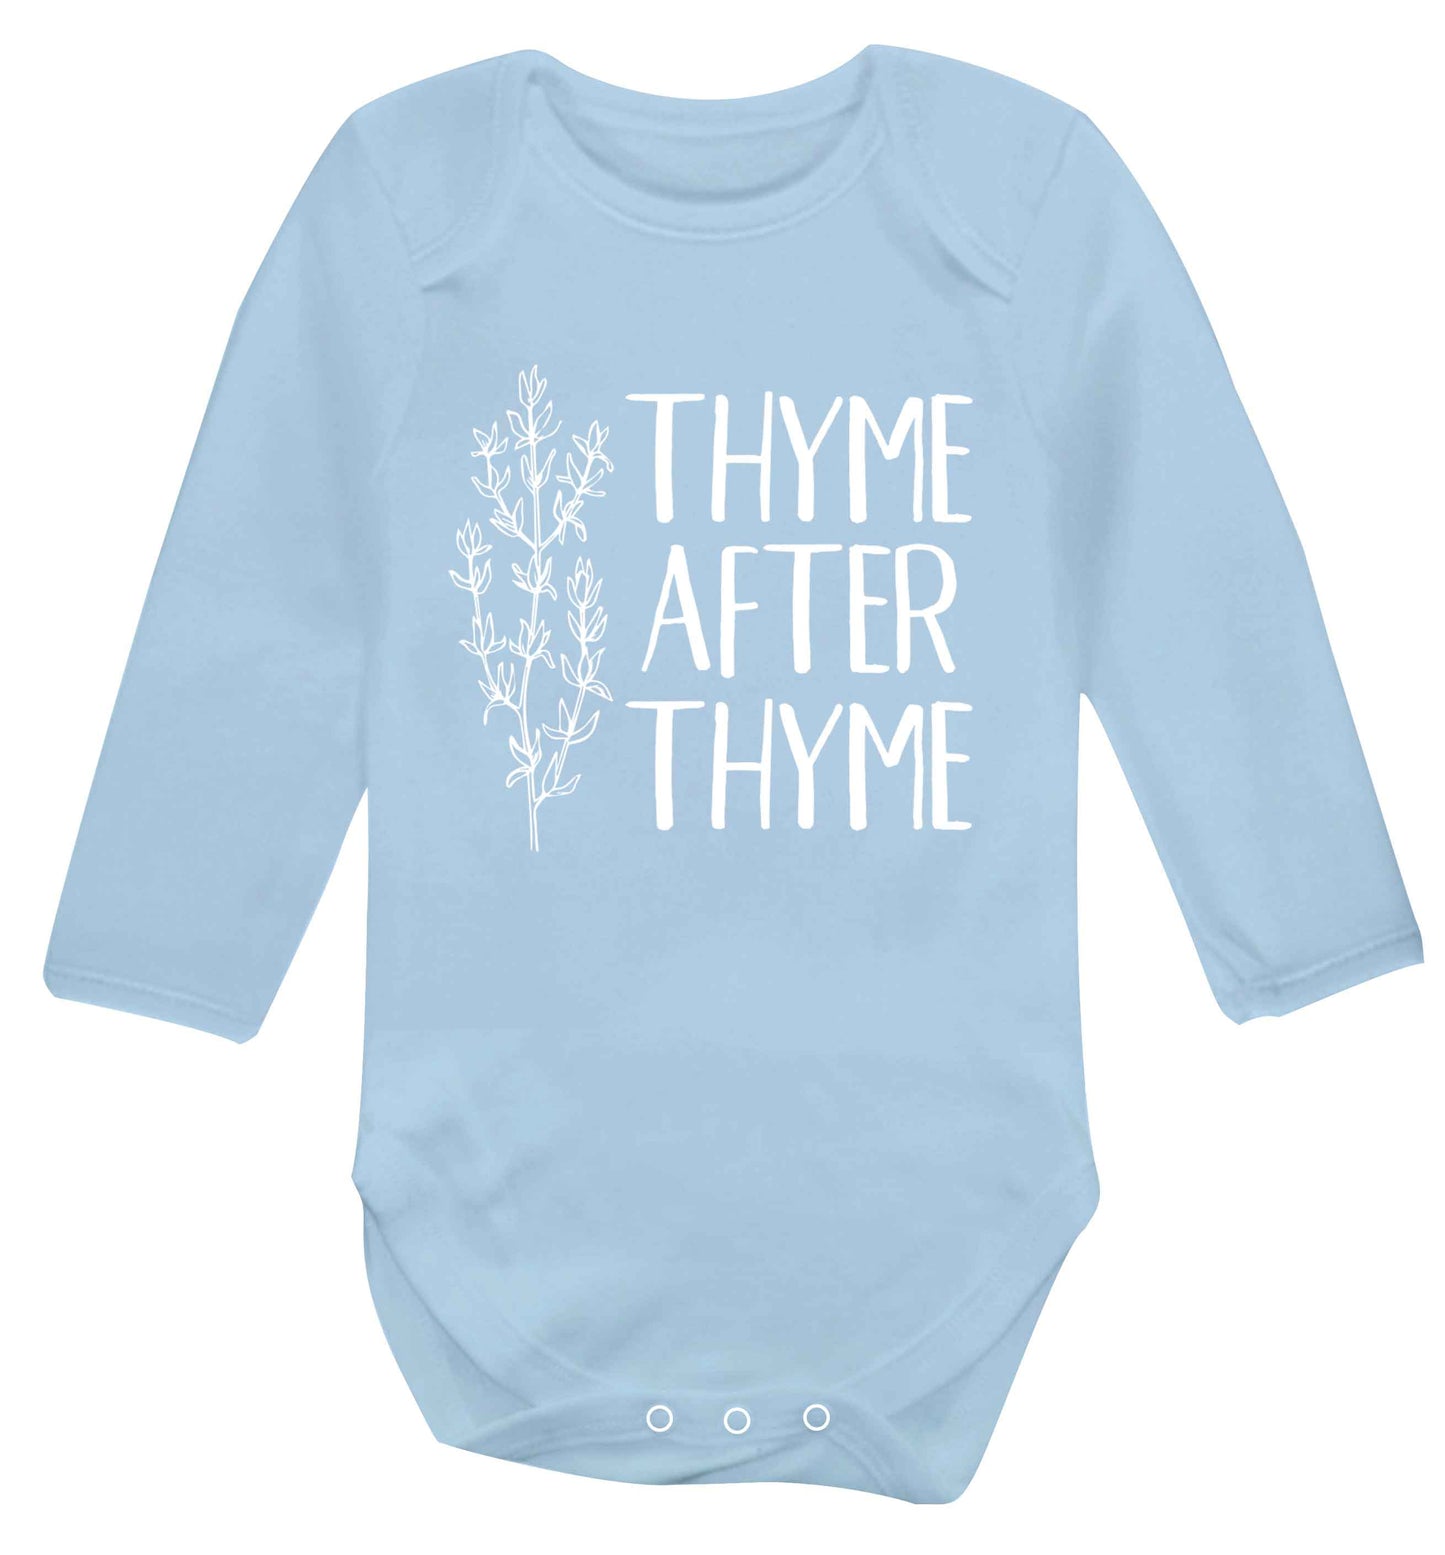 Thyme after thyme Baby Vest long sleeved pale blue 6-12 months